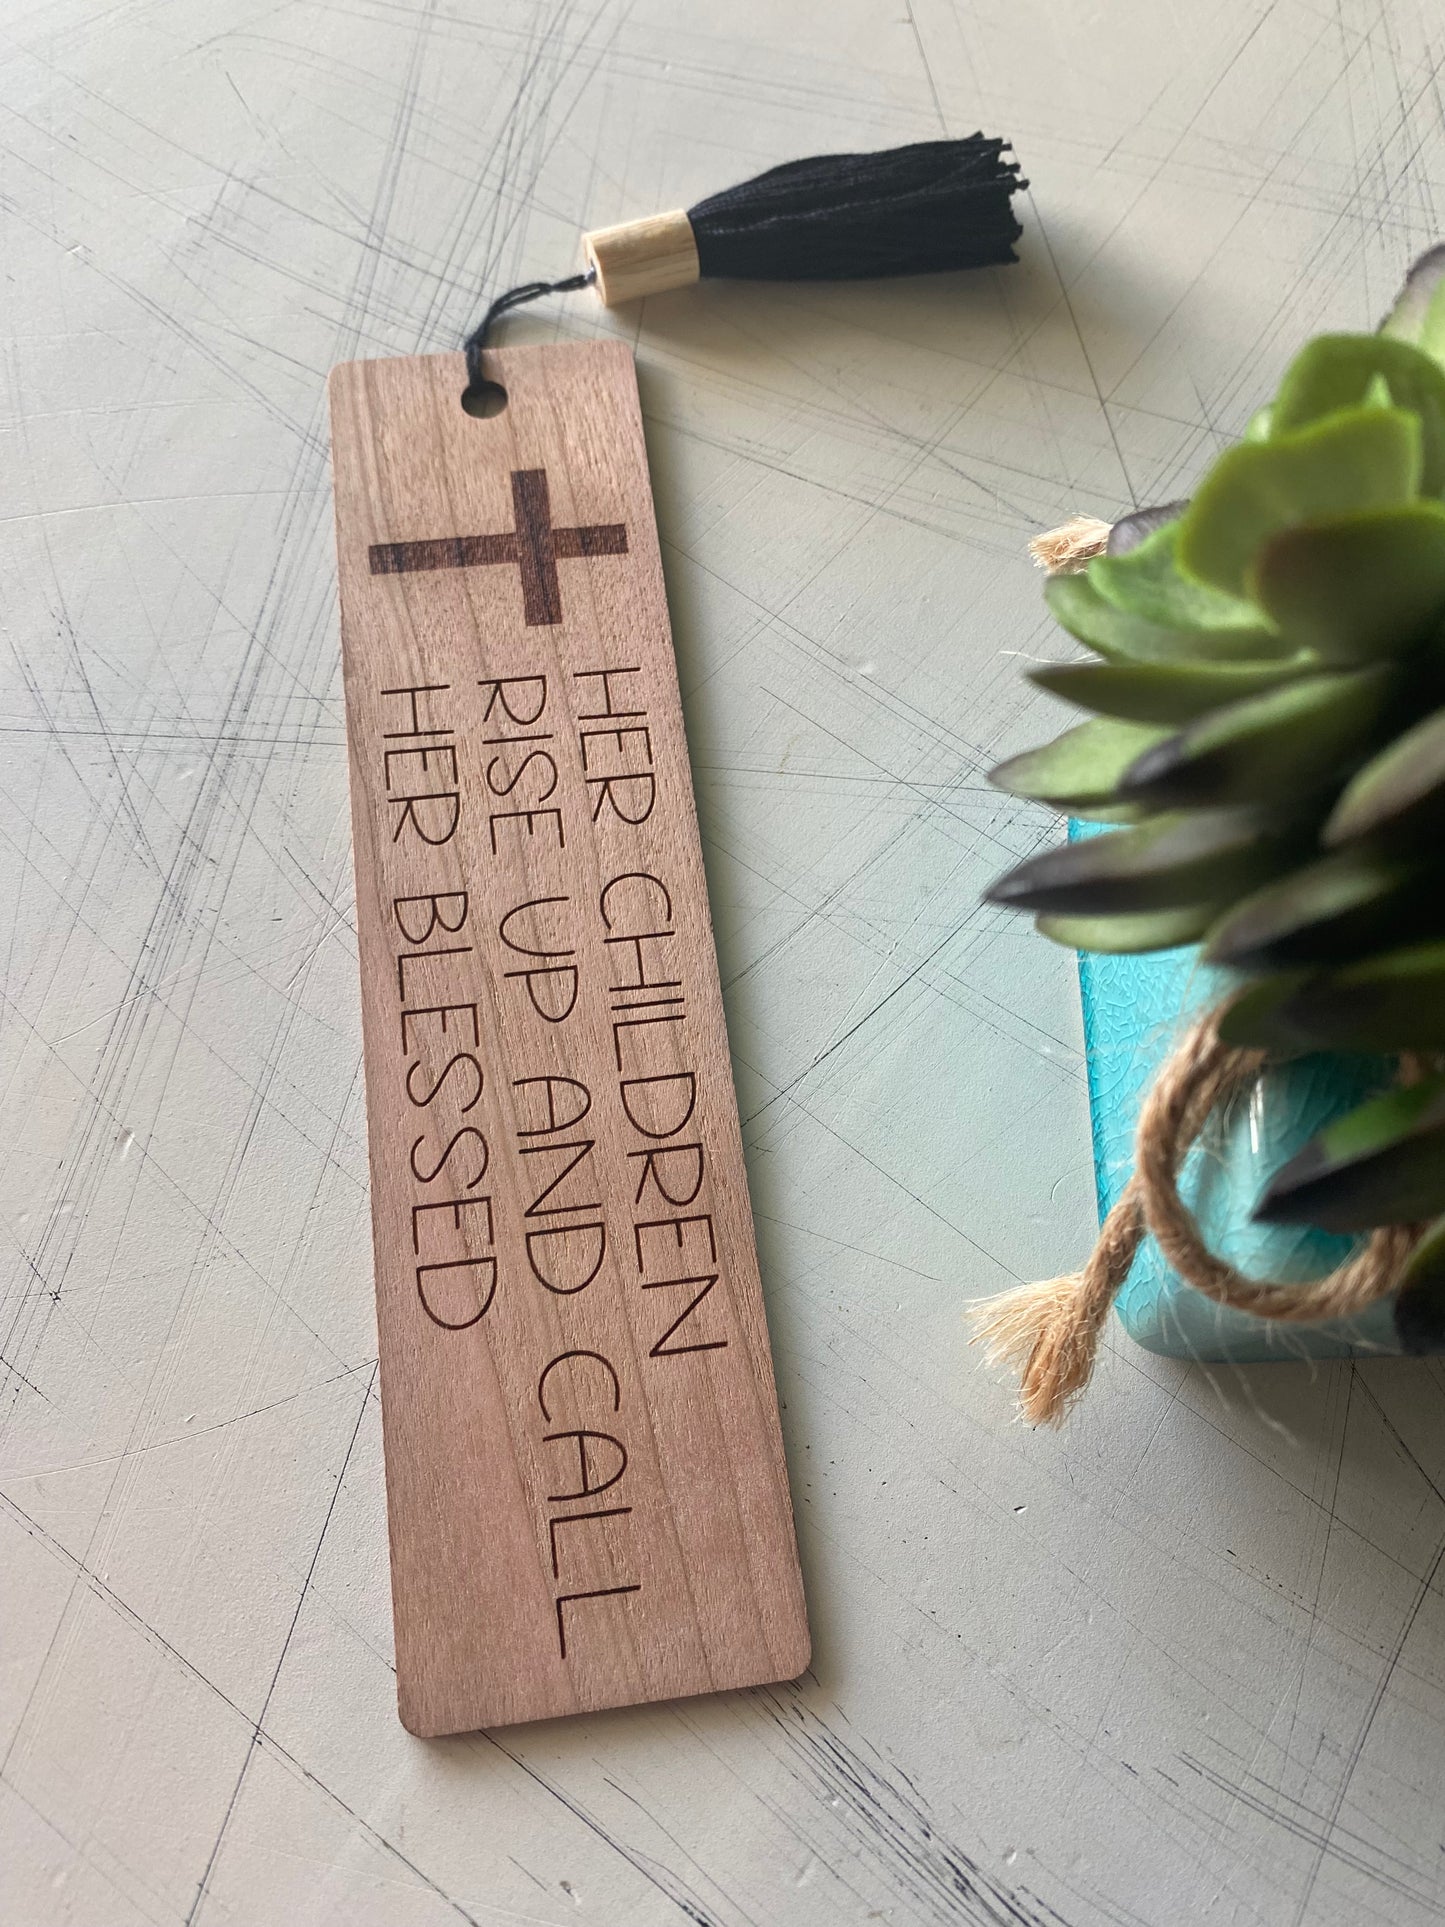 Her children rise up and call her blessed - wood bookmark - Novotny Designs